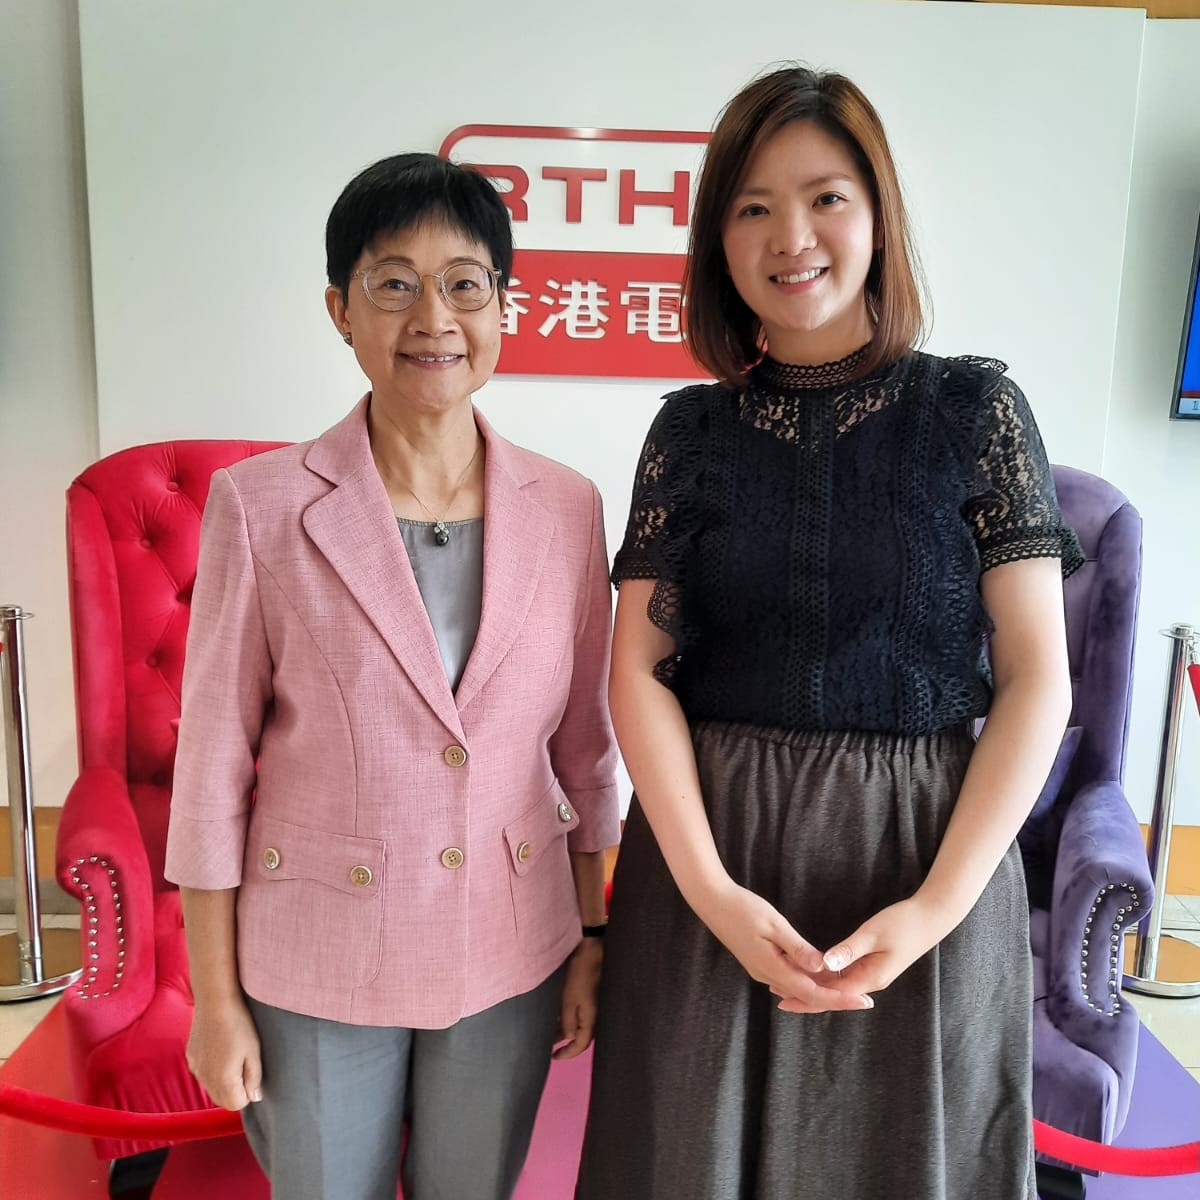 EOC Chairperson Ms Linda LAM Mei-sau unveils her vision in radio programmes